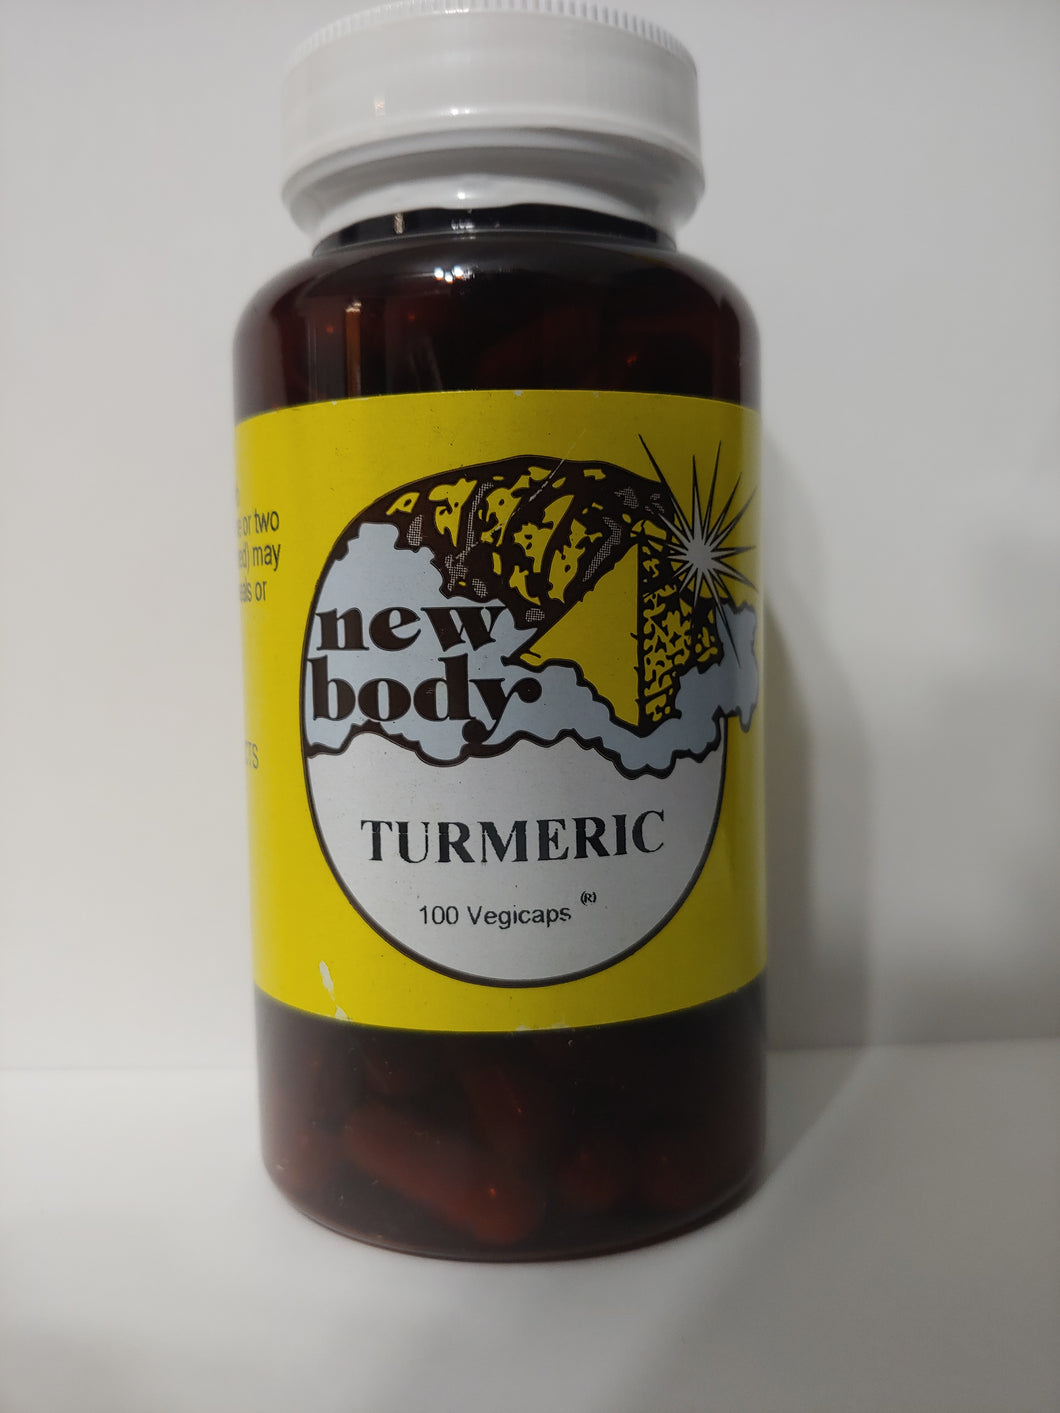 New Body Turmeric 100 Vegicaps This Product Contains No Fillers, Binders, or Additives